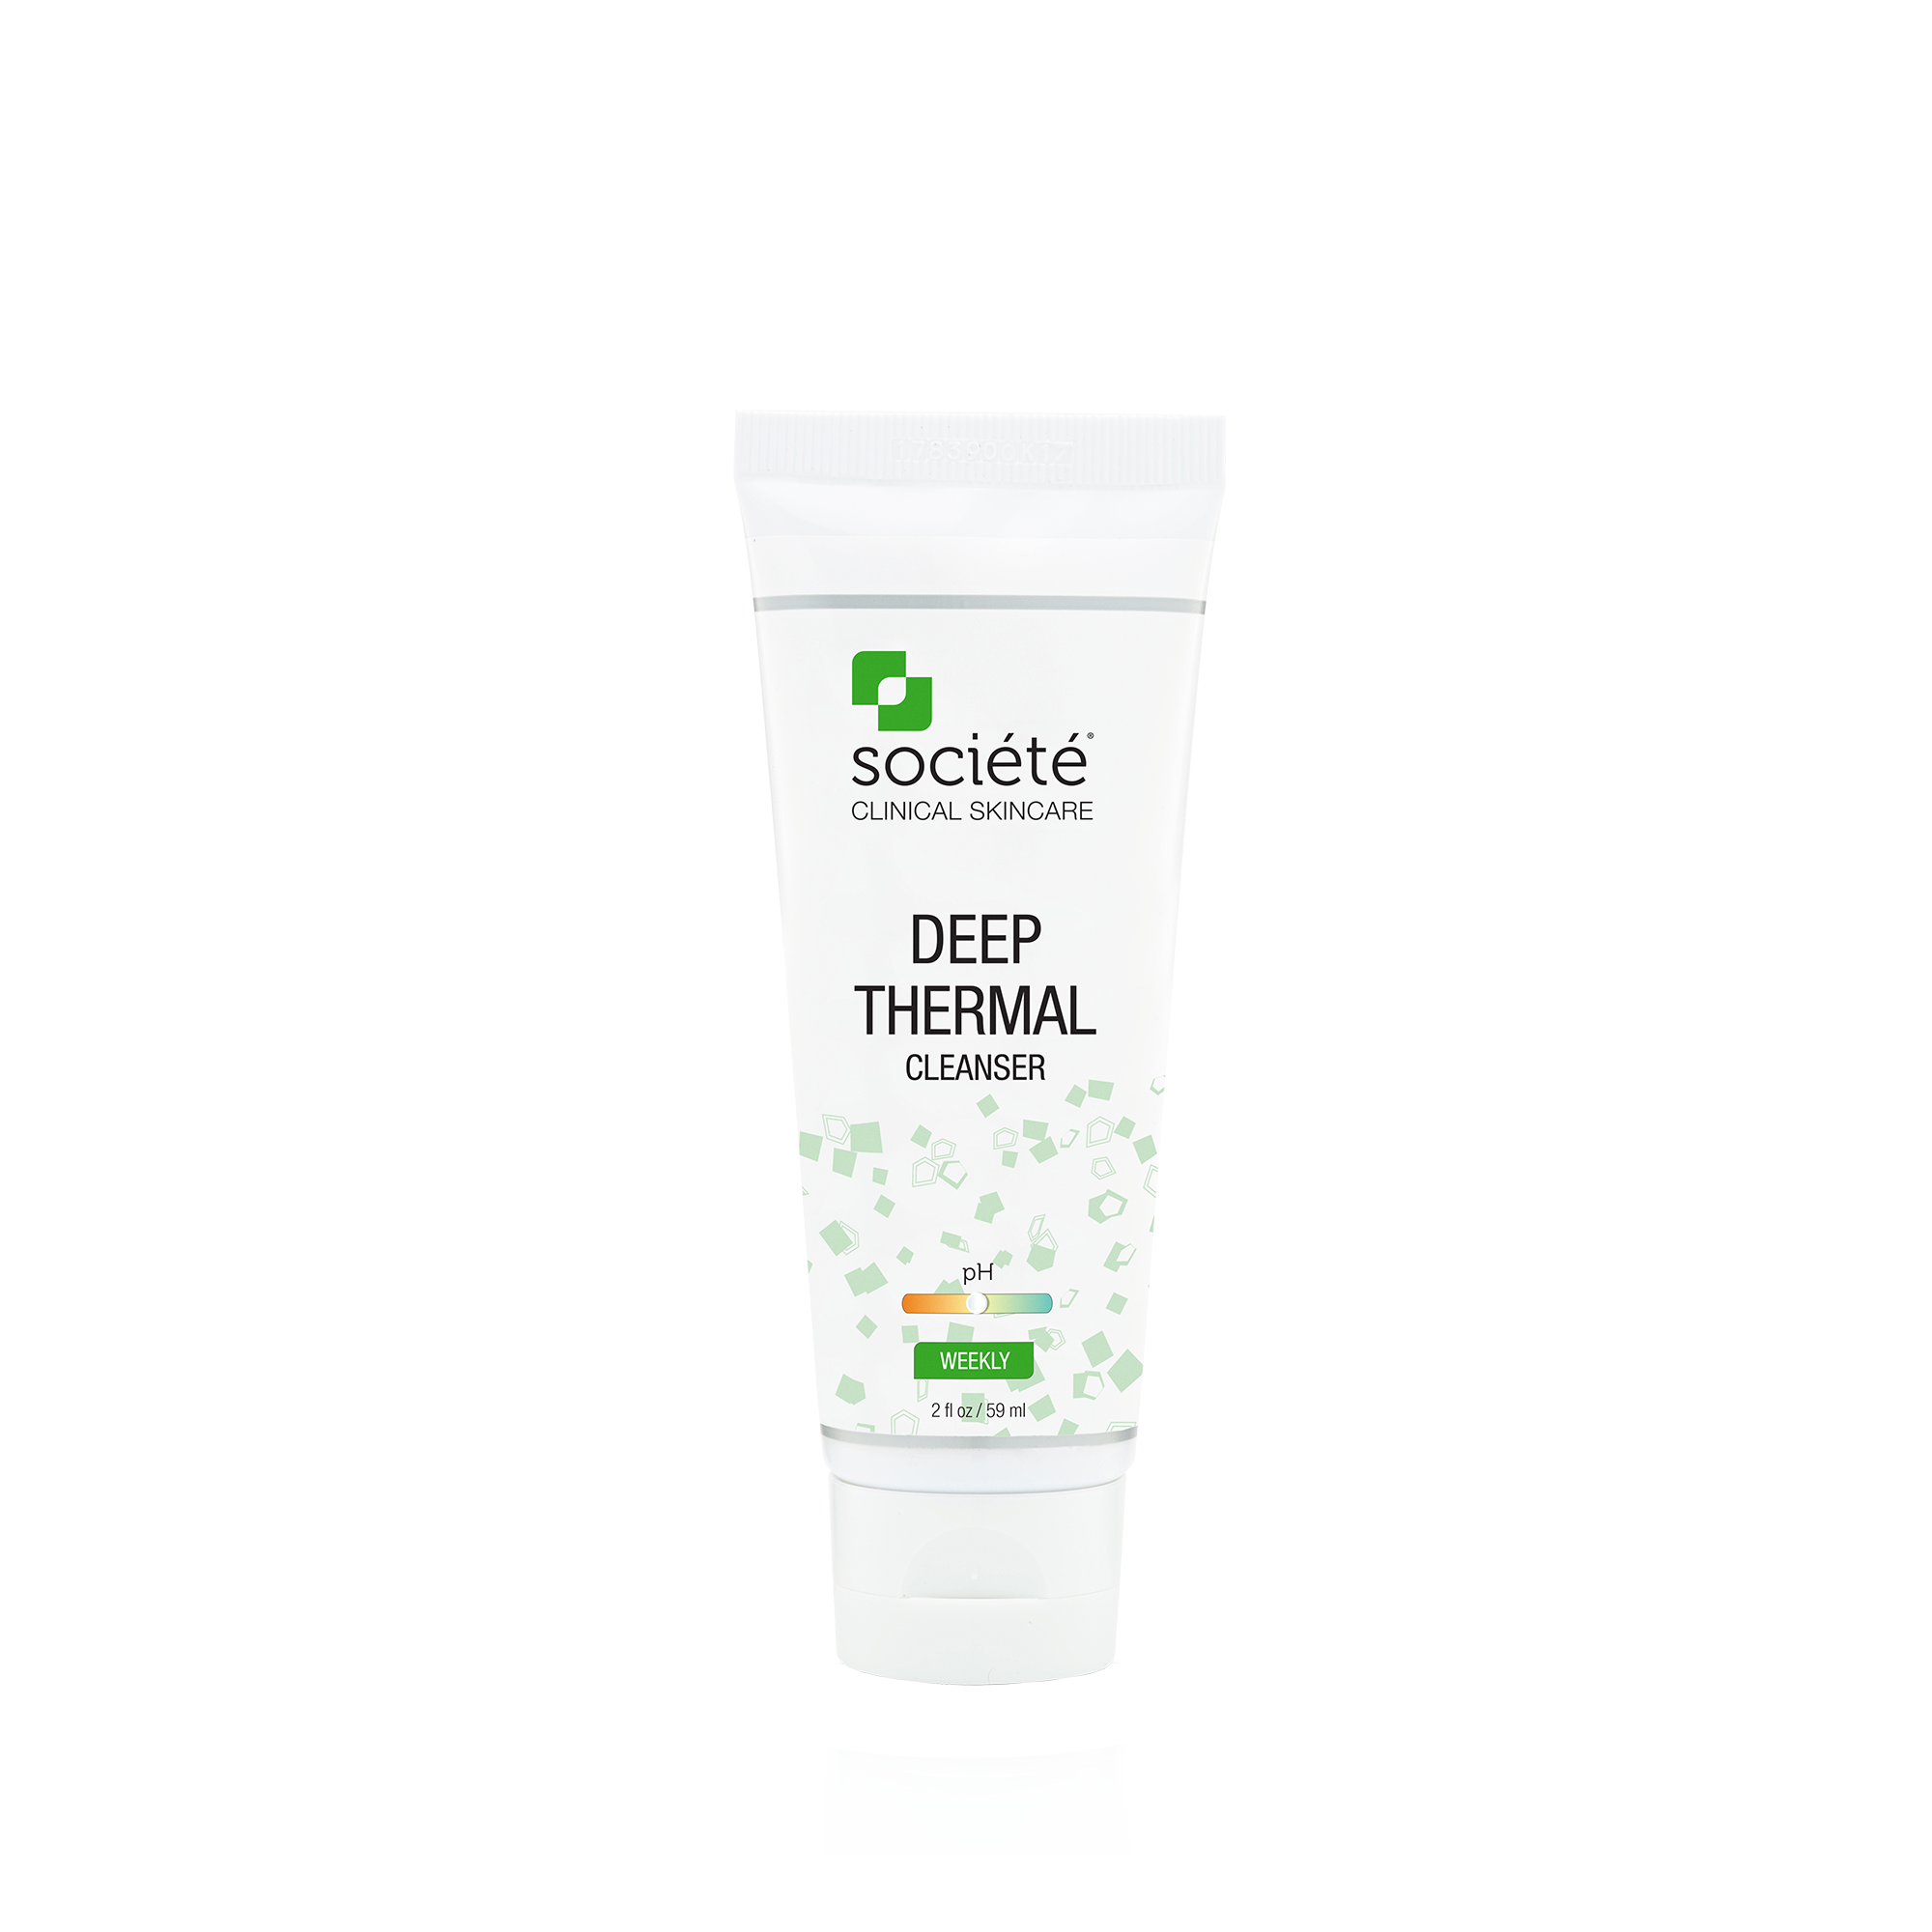 DEEP Thermal Cleanser 59ml